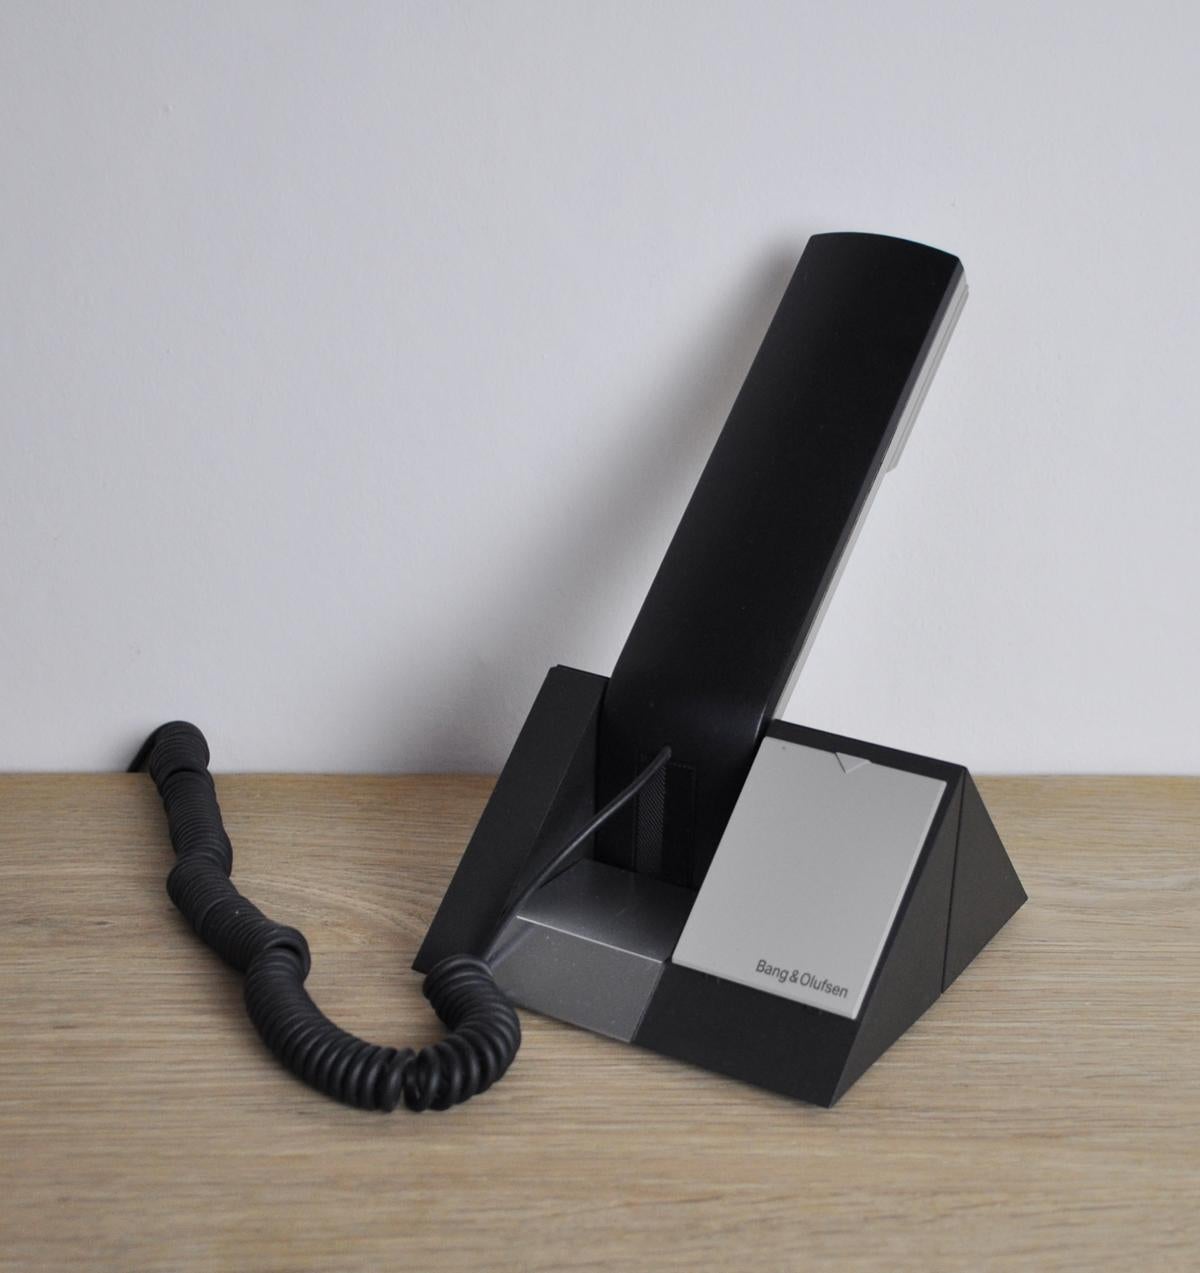 Late 20th Century Beocom 1401 Telephone from 1990s by Bang & Olusfen